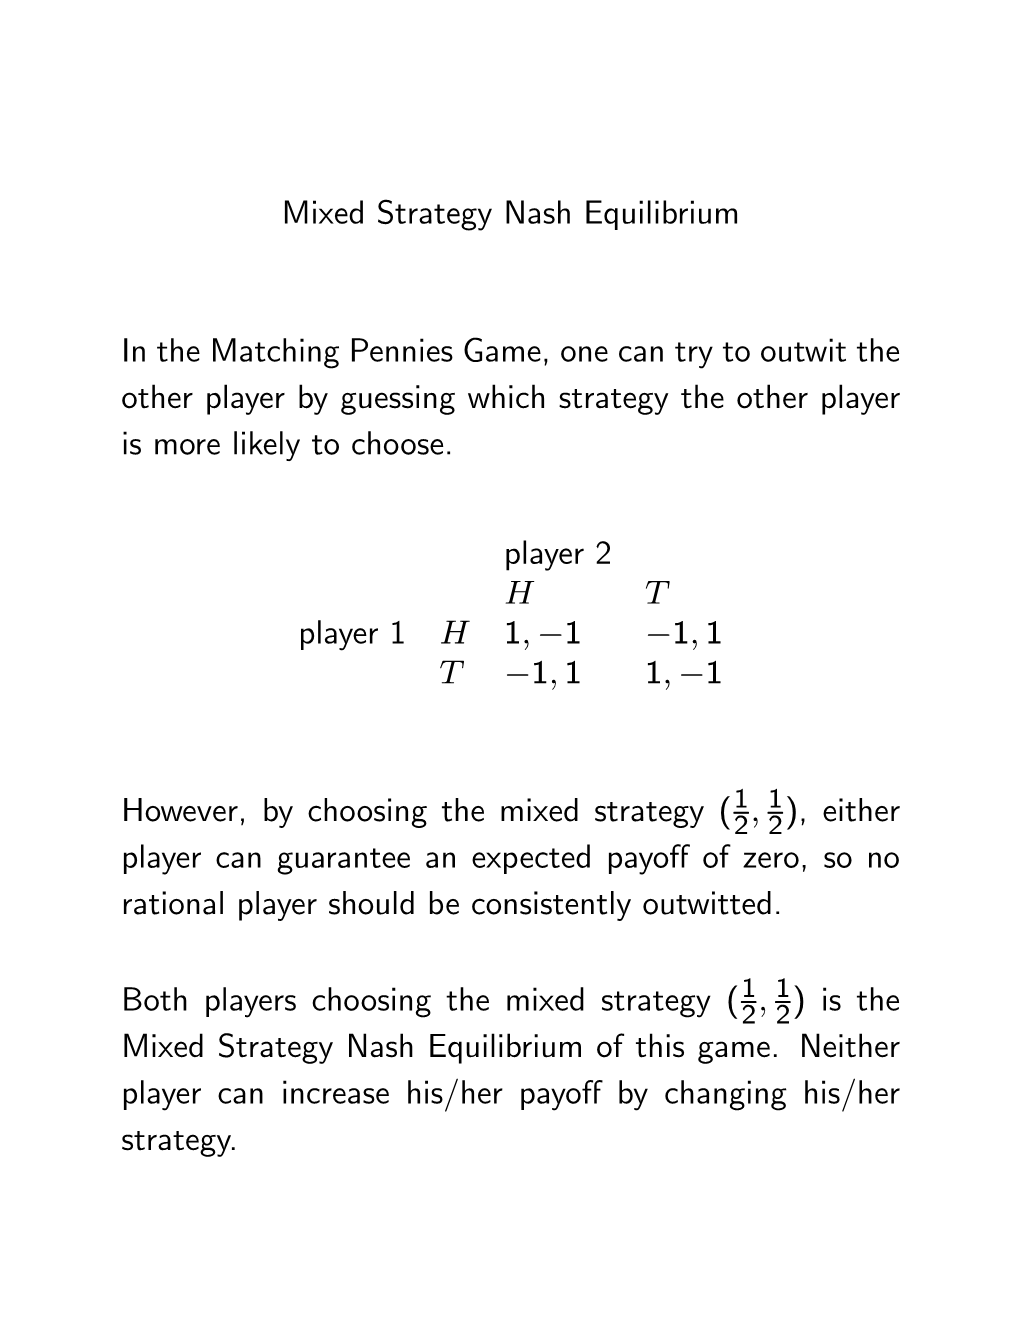 Mixed Strategy Nash Equilibrium in the Matching Pennies Game, One